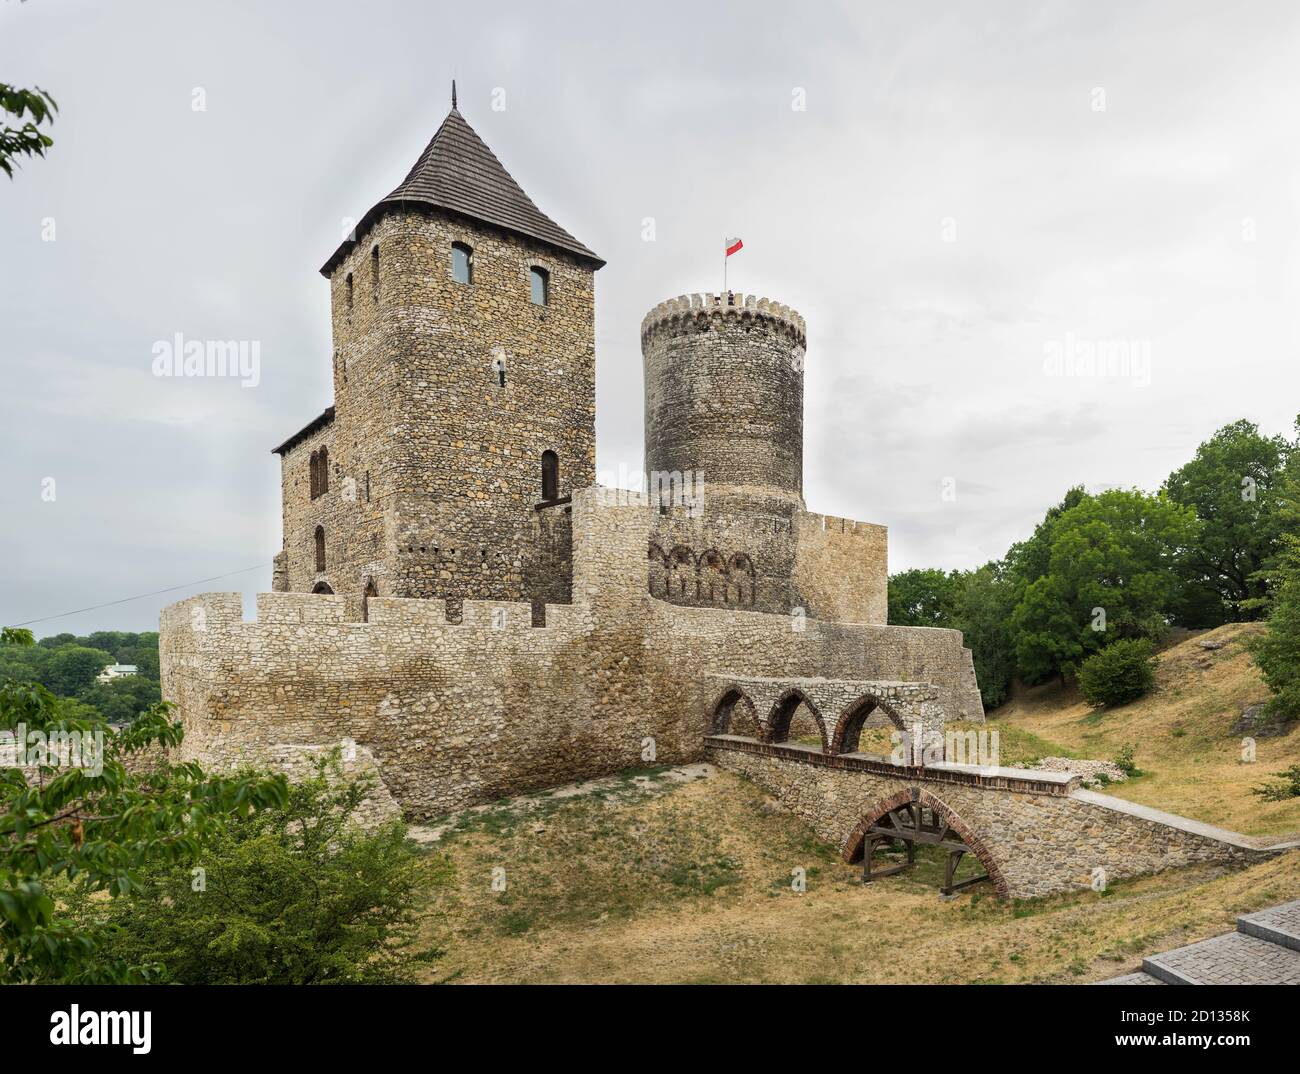 BEDZIN, POLAND - Jul 21, 2019: Bedzin Castle - a medieval fortress built in the mid-fourteenth century by Casimir the Great Stock Photo